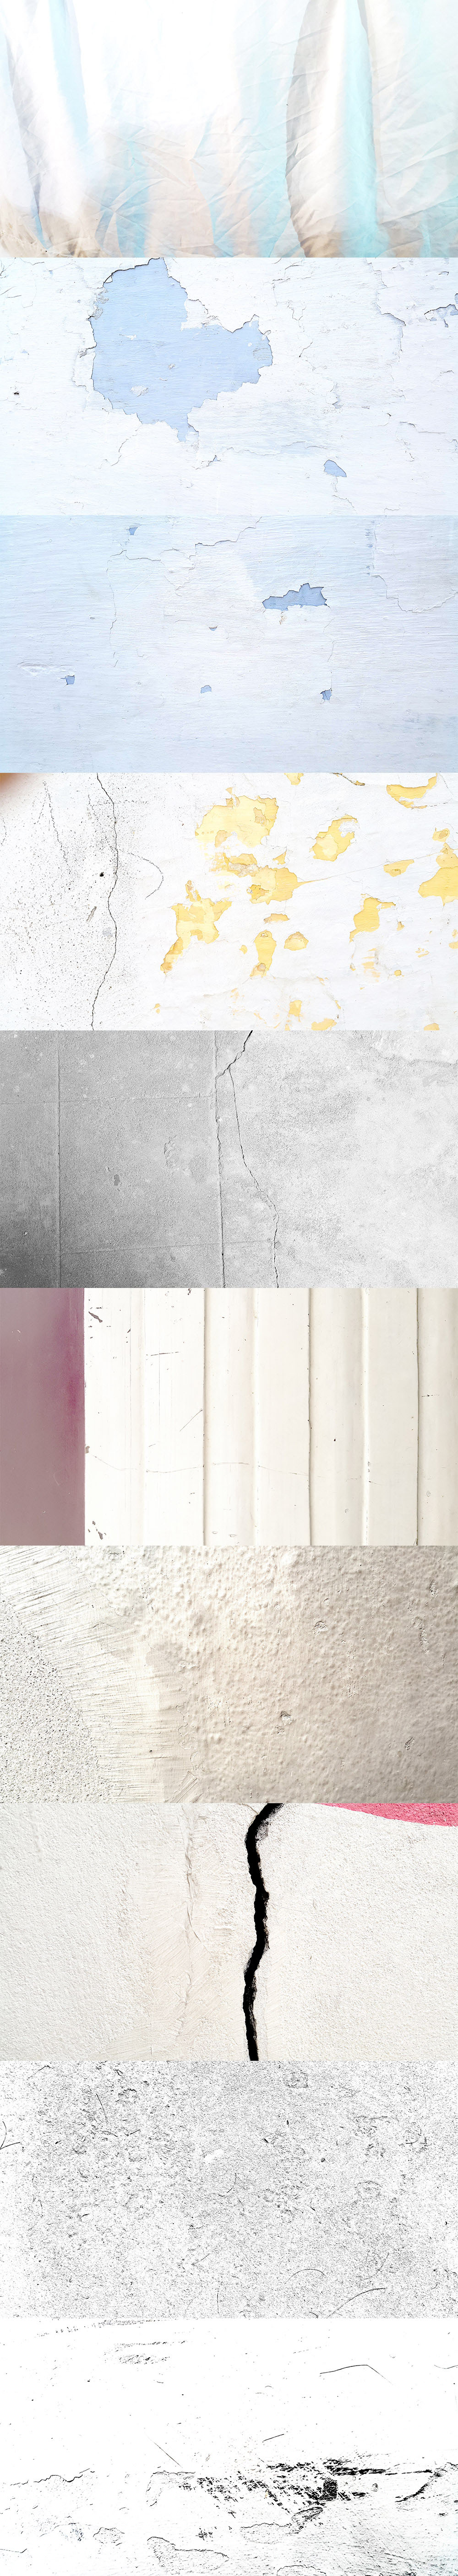 10 Light And Subtle Grunge Textures - GraphicsFuel